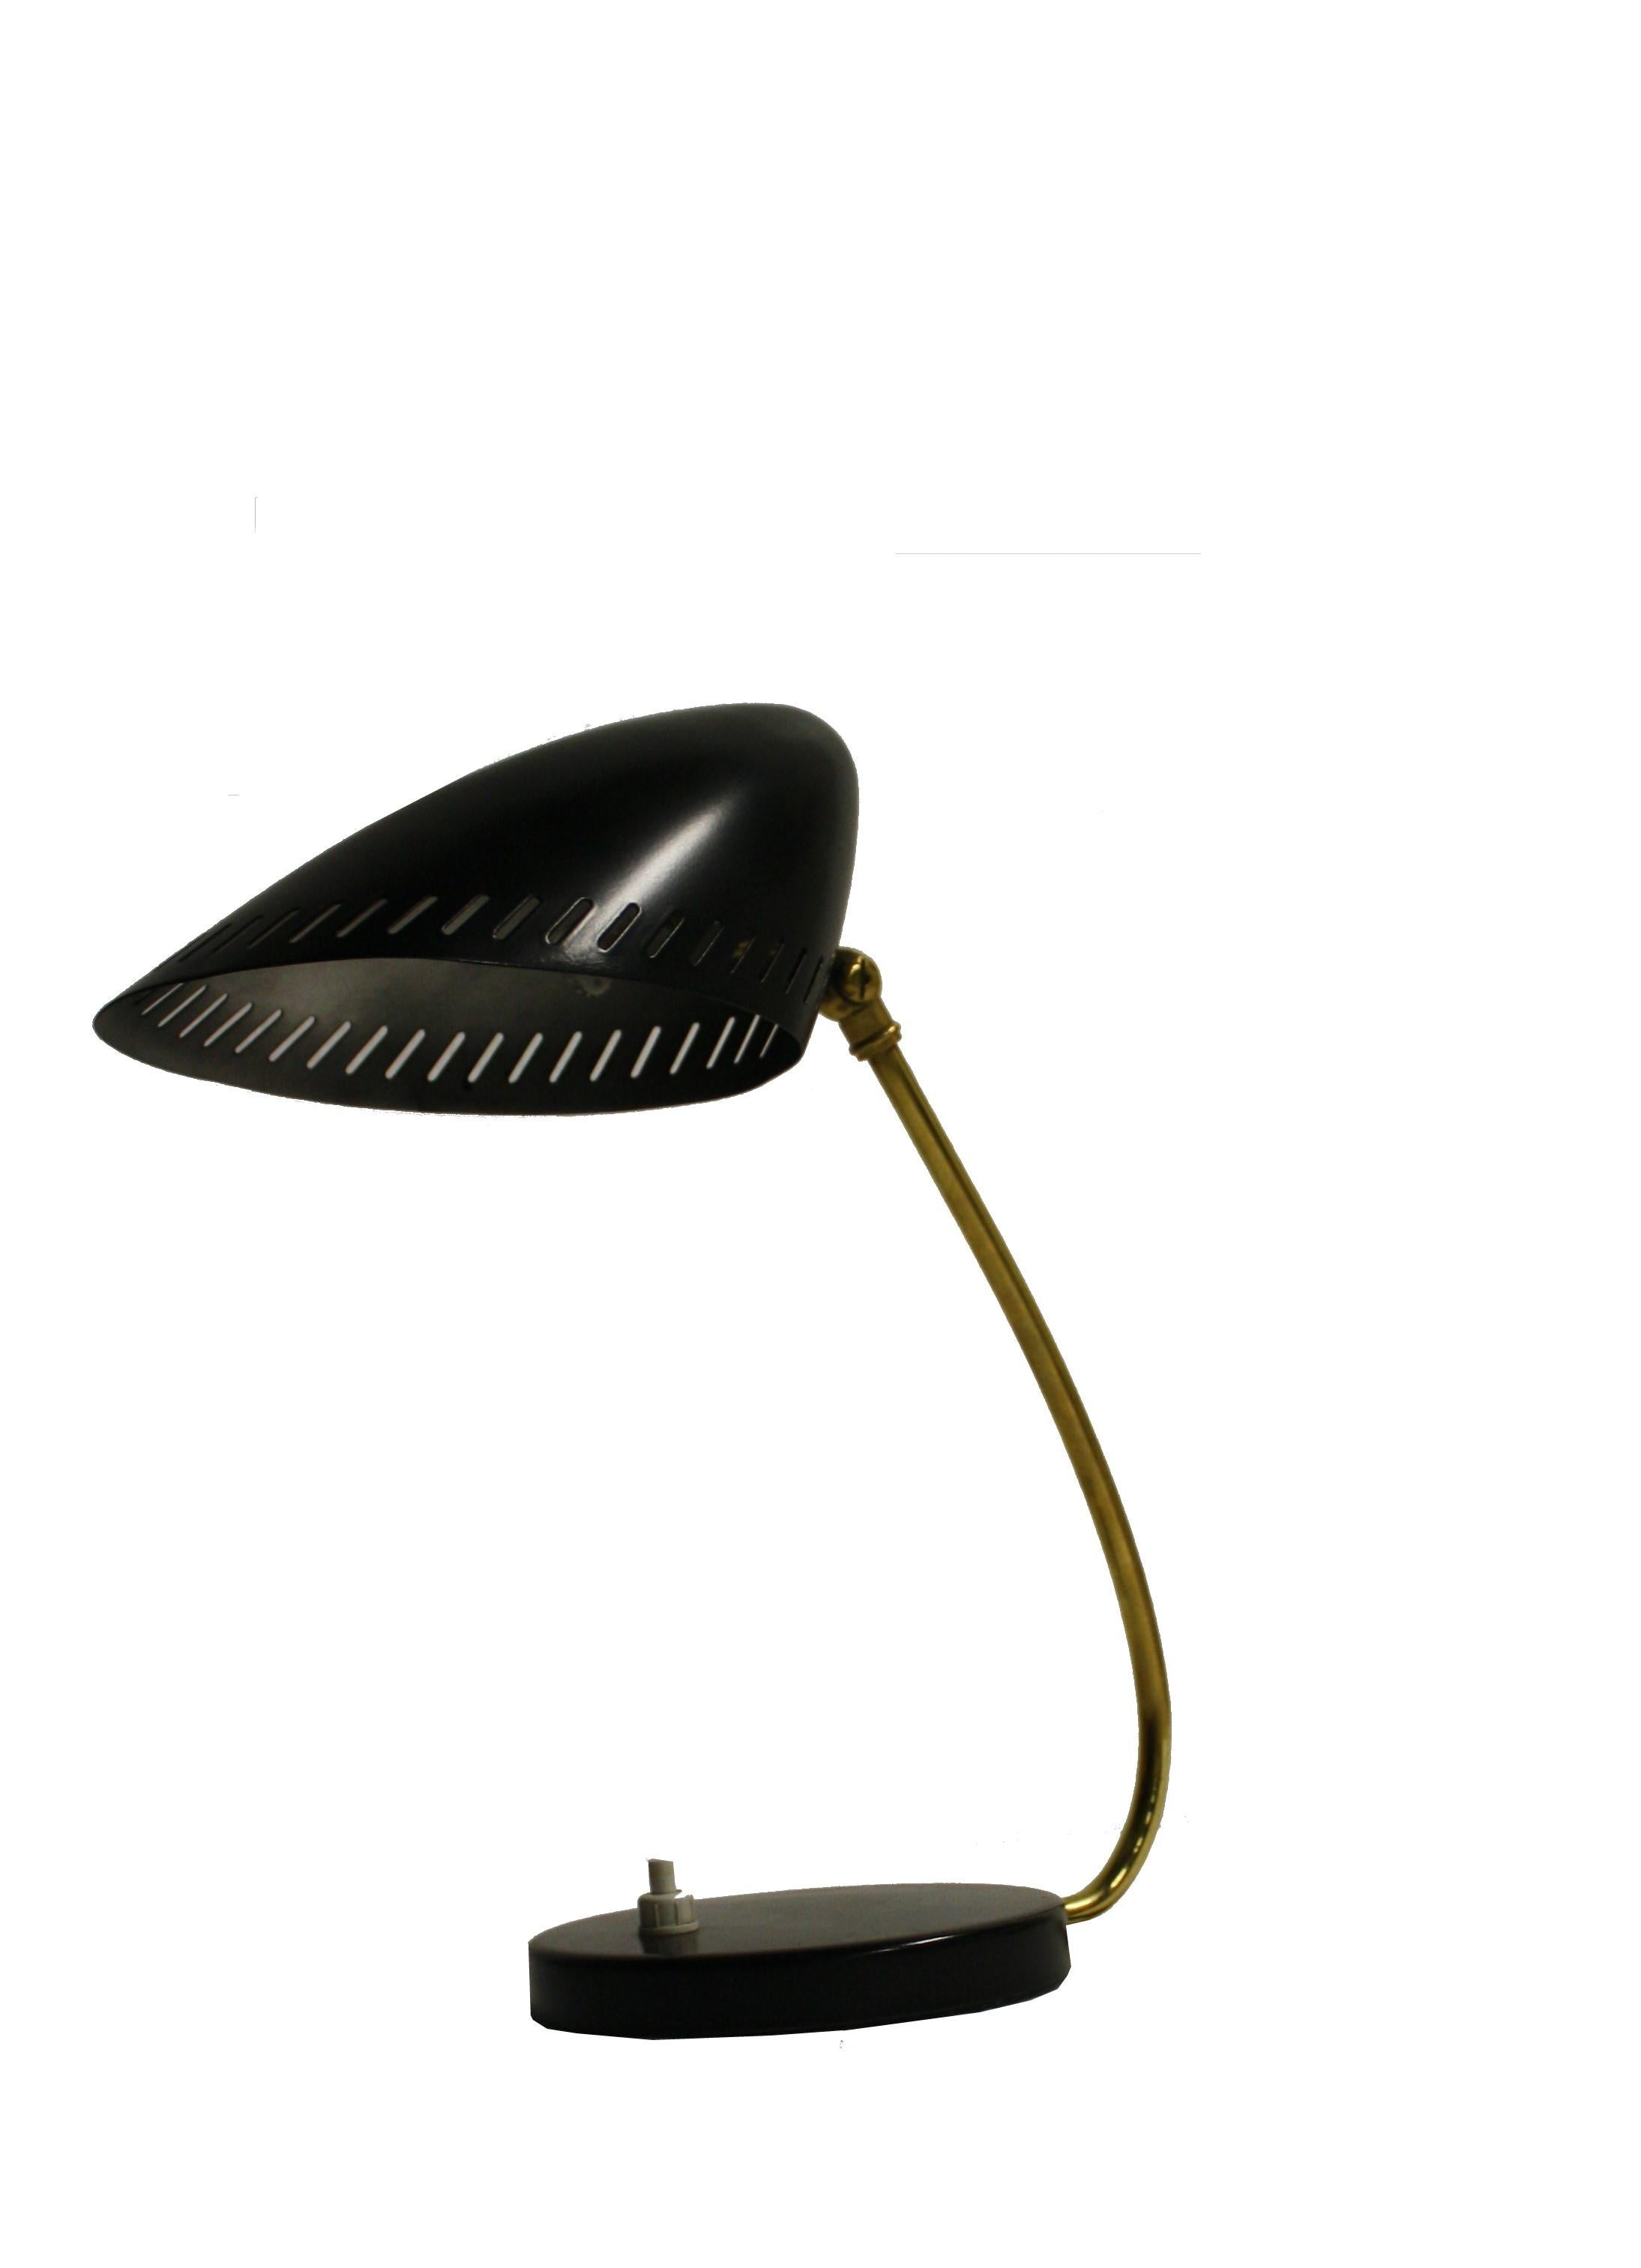 Charming brass and black metal table lamp by Stilnovo.

This lamp has been saved and fully restored to it's former glory.

Polished brass and professionally restored the black coating on the shade.

The shade is articulated so It can be